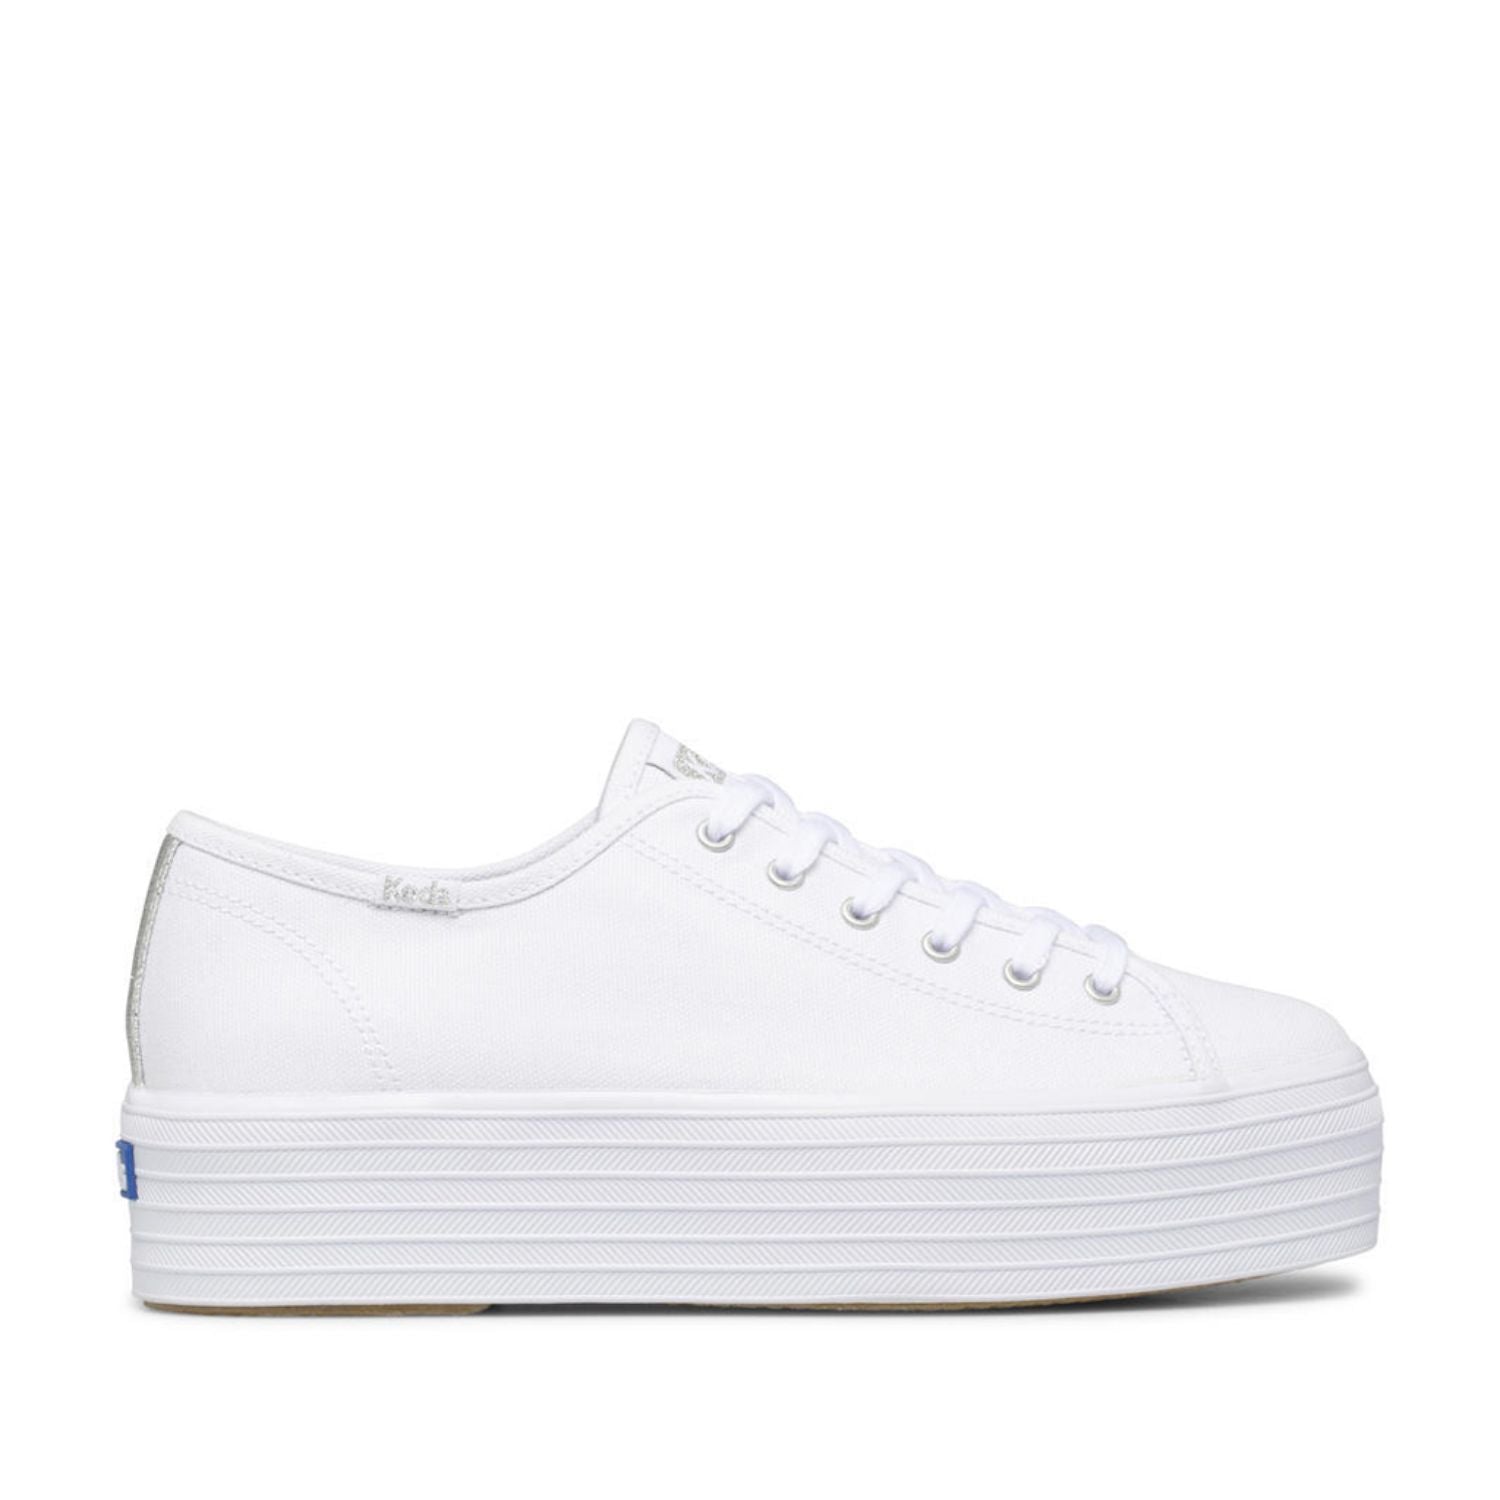 Keds Women's Triple Up Canvas in White